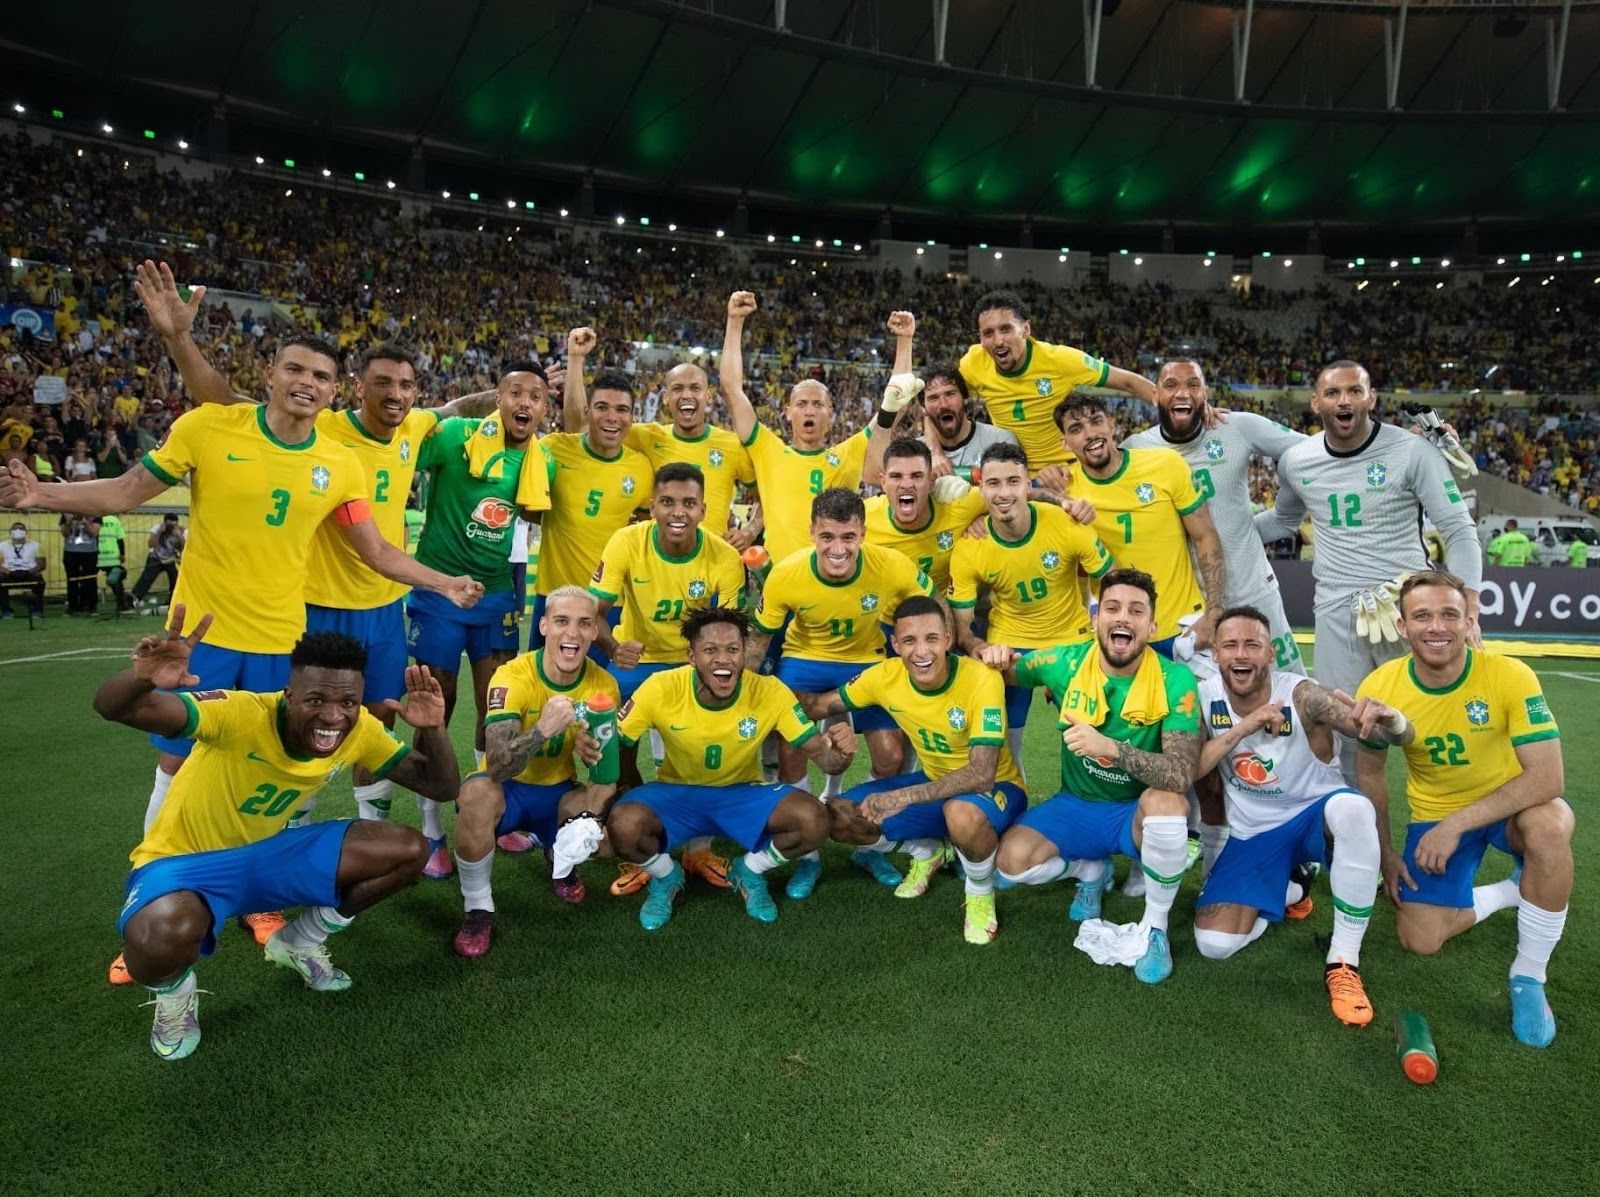 Cameroon vs Brazil, December 2: Head-to-Head Statistics, Line-ups, Prediction for the 2022 World Cup Match